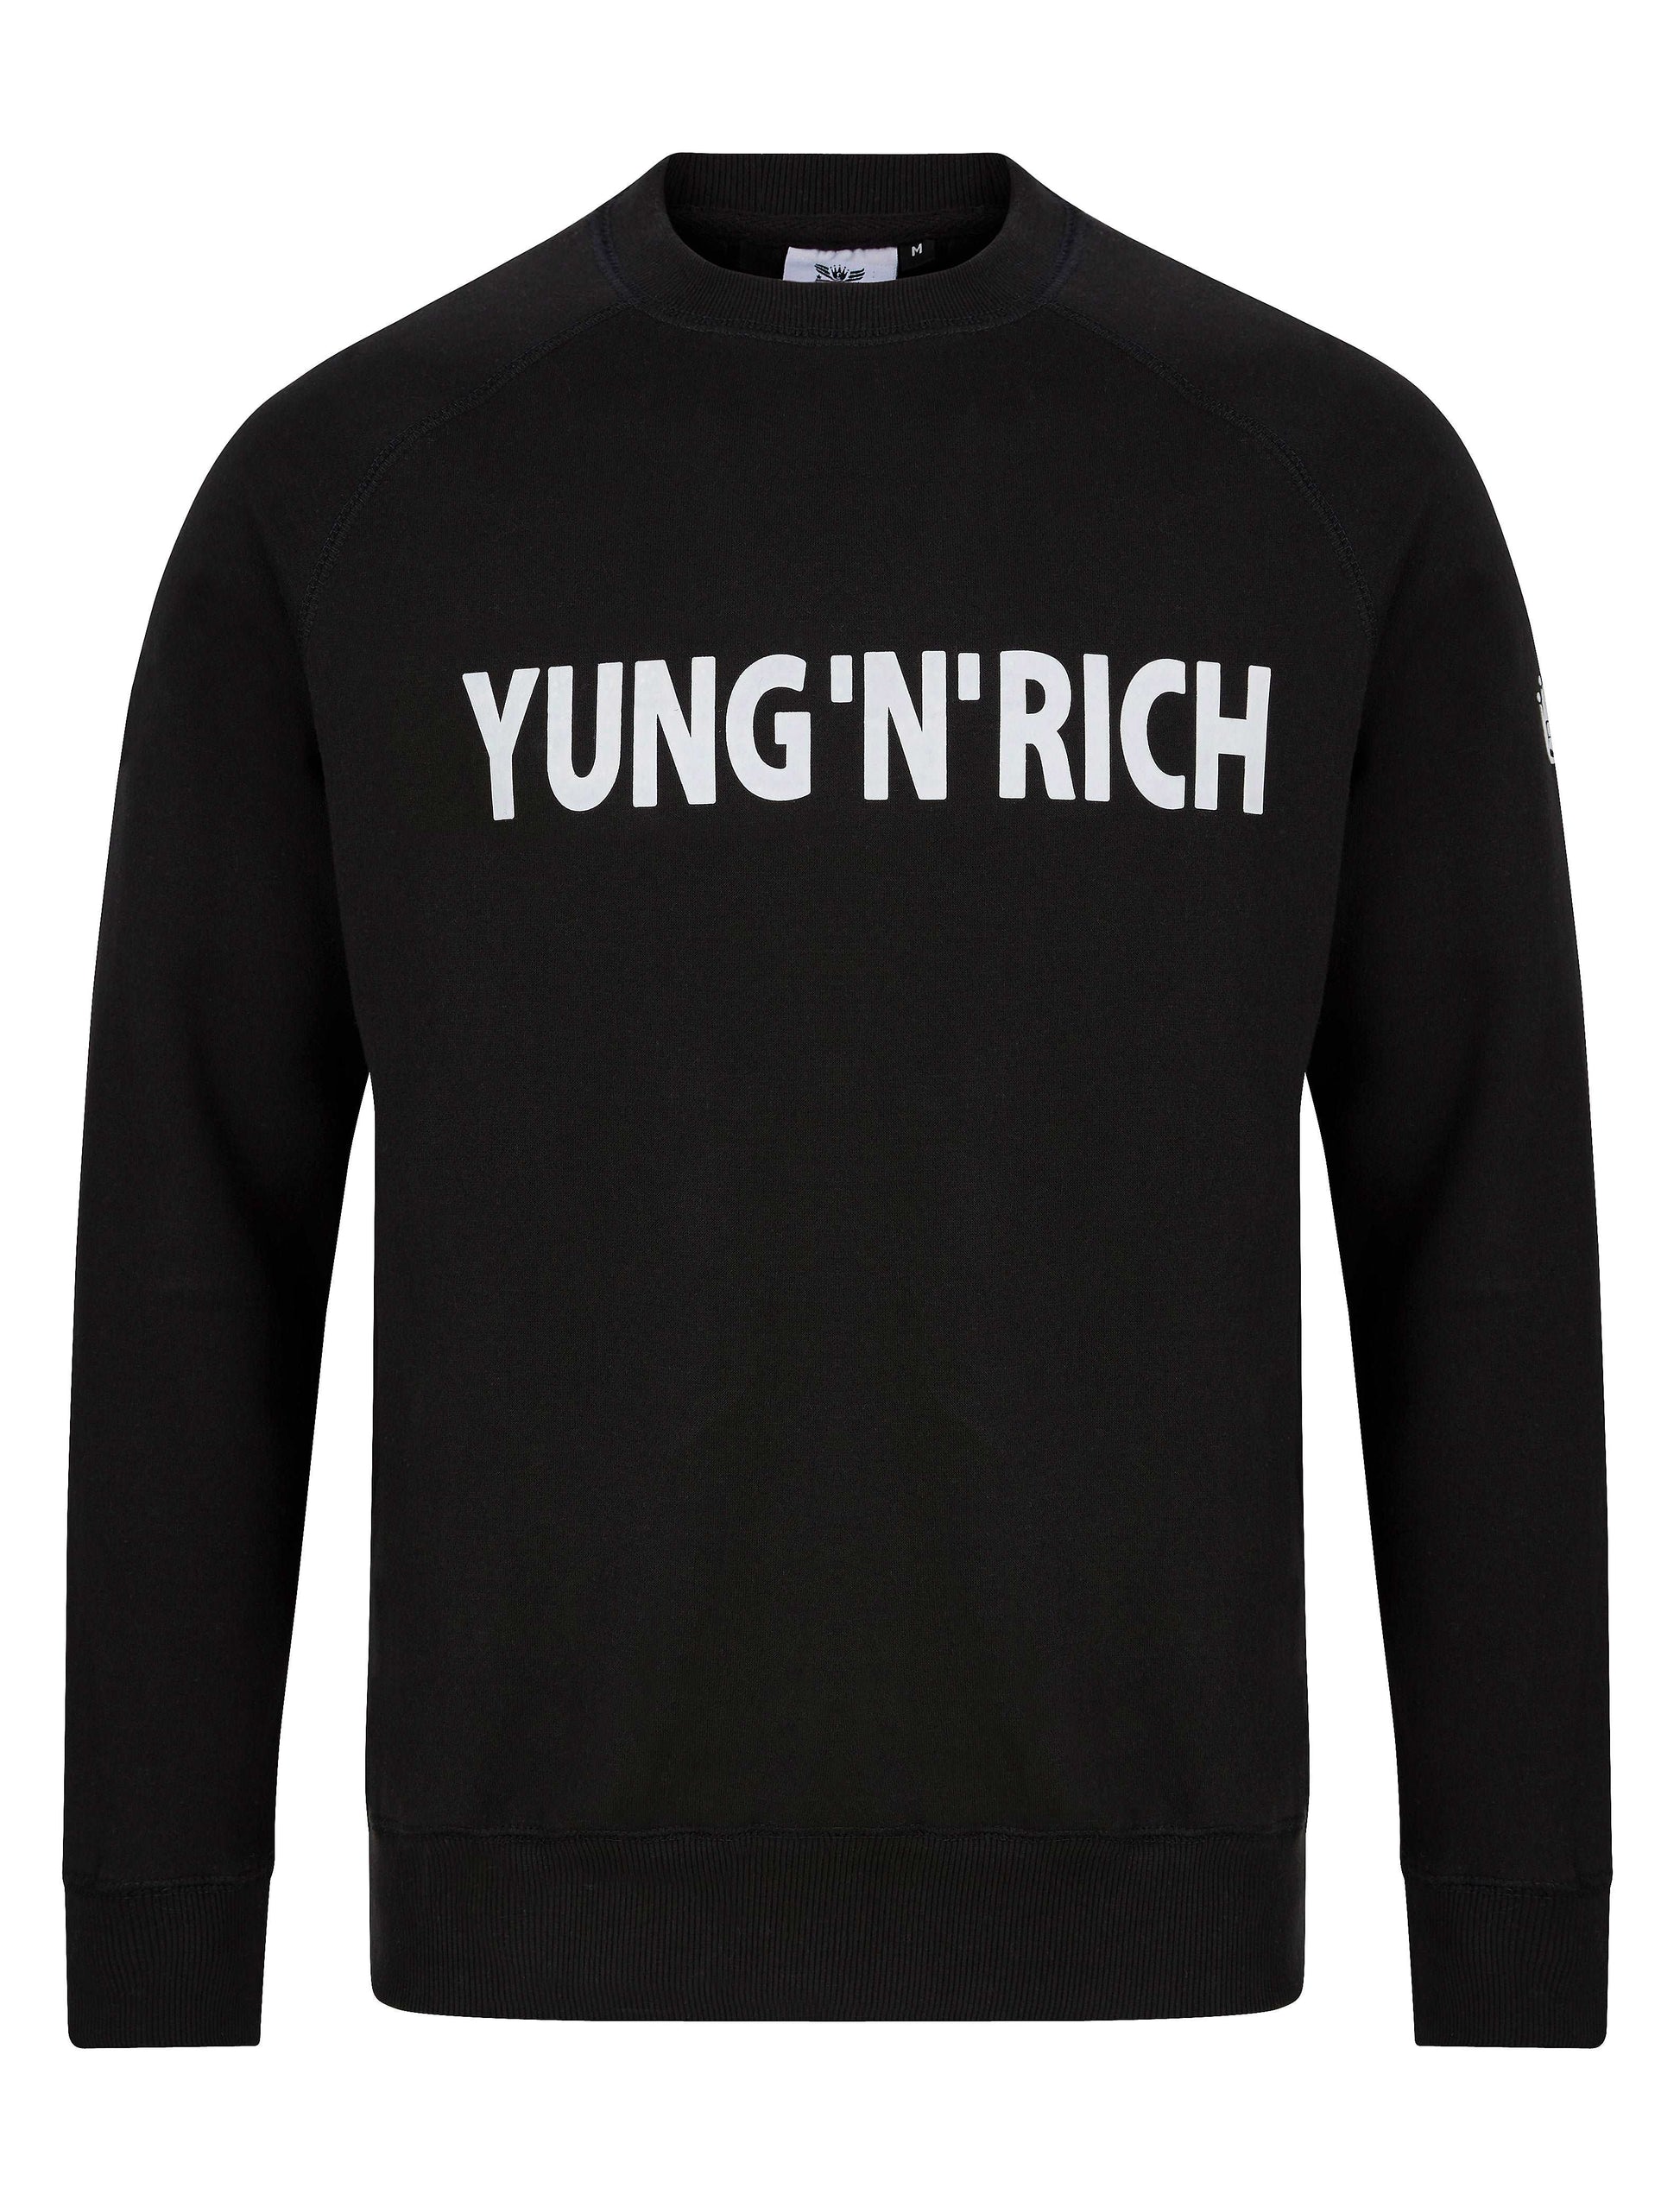 Yung'n'Rich Black Jumper Sweater White Wording Apparel & Accessories > Clothing >  jumper > sweater